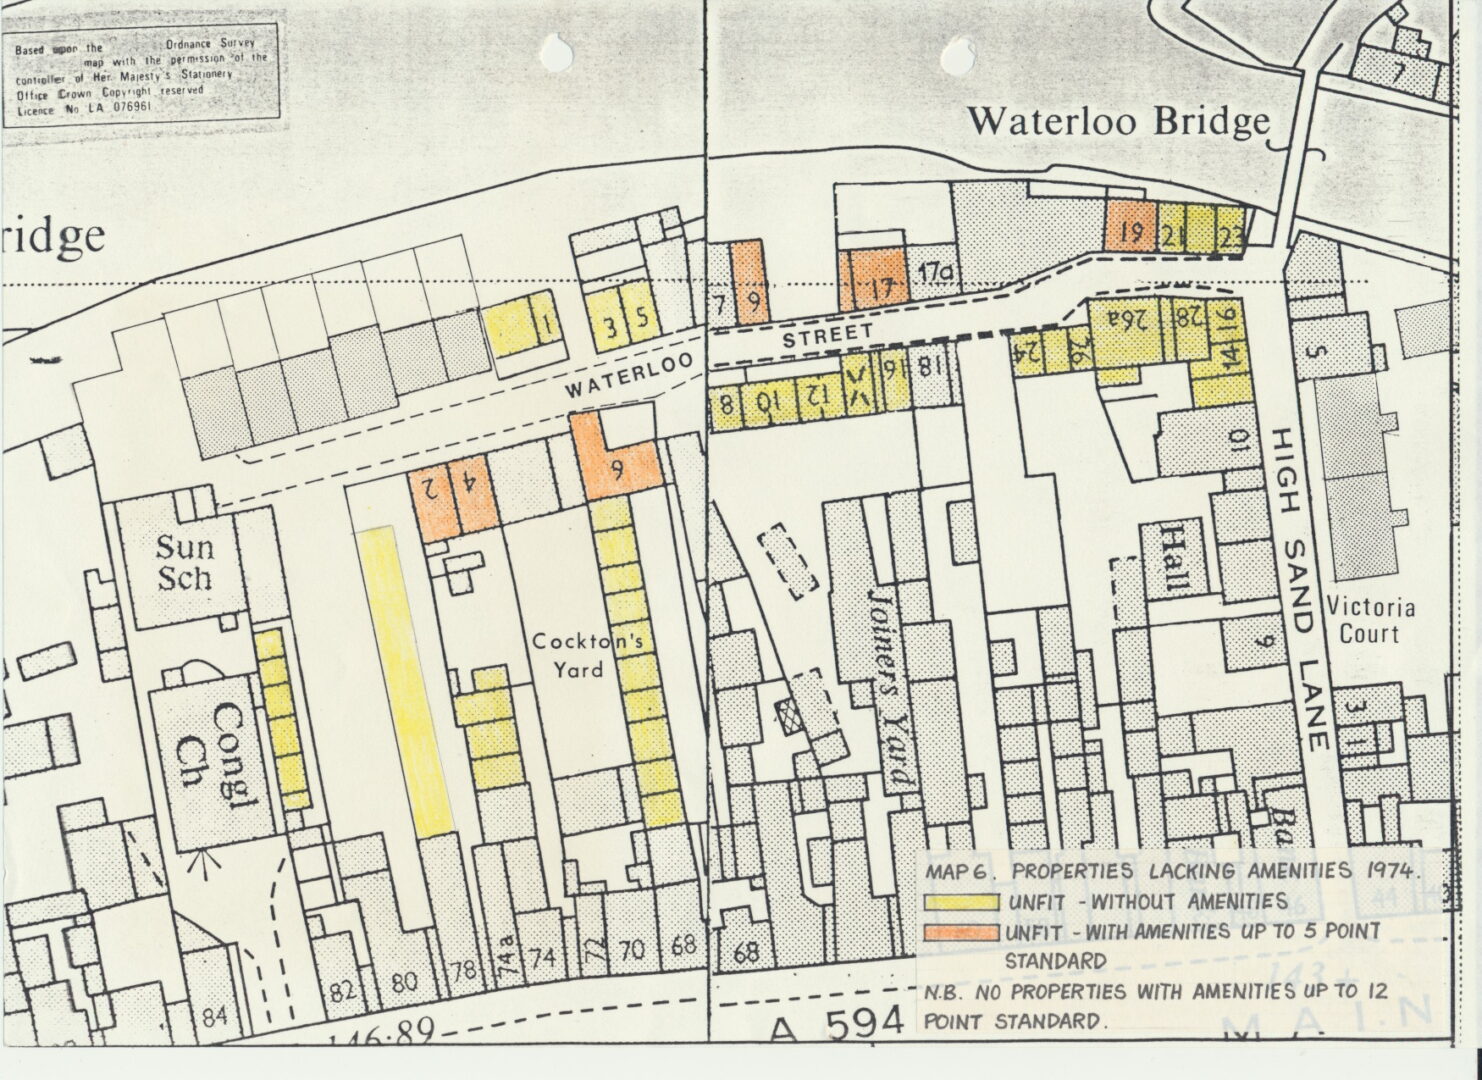 Map 06 Waterloo Street properties lacking amenities in 1974 in report of 1989 rotated